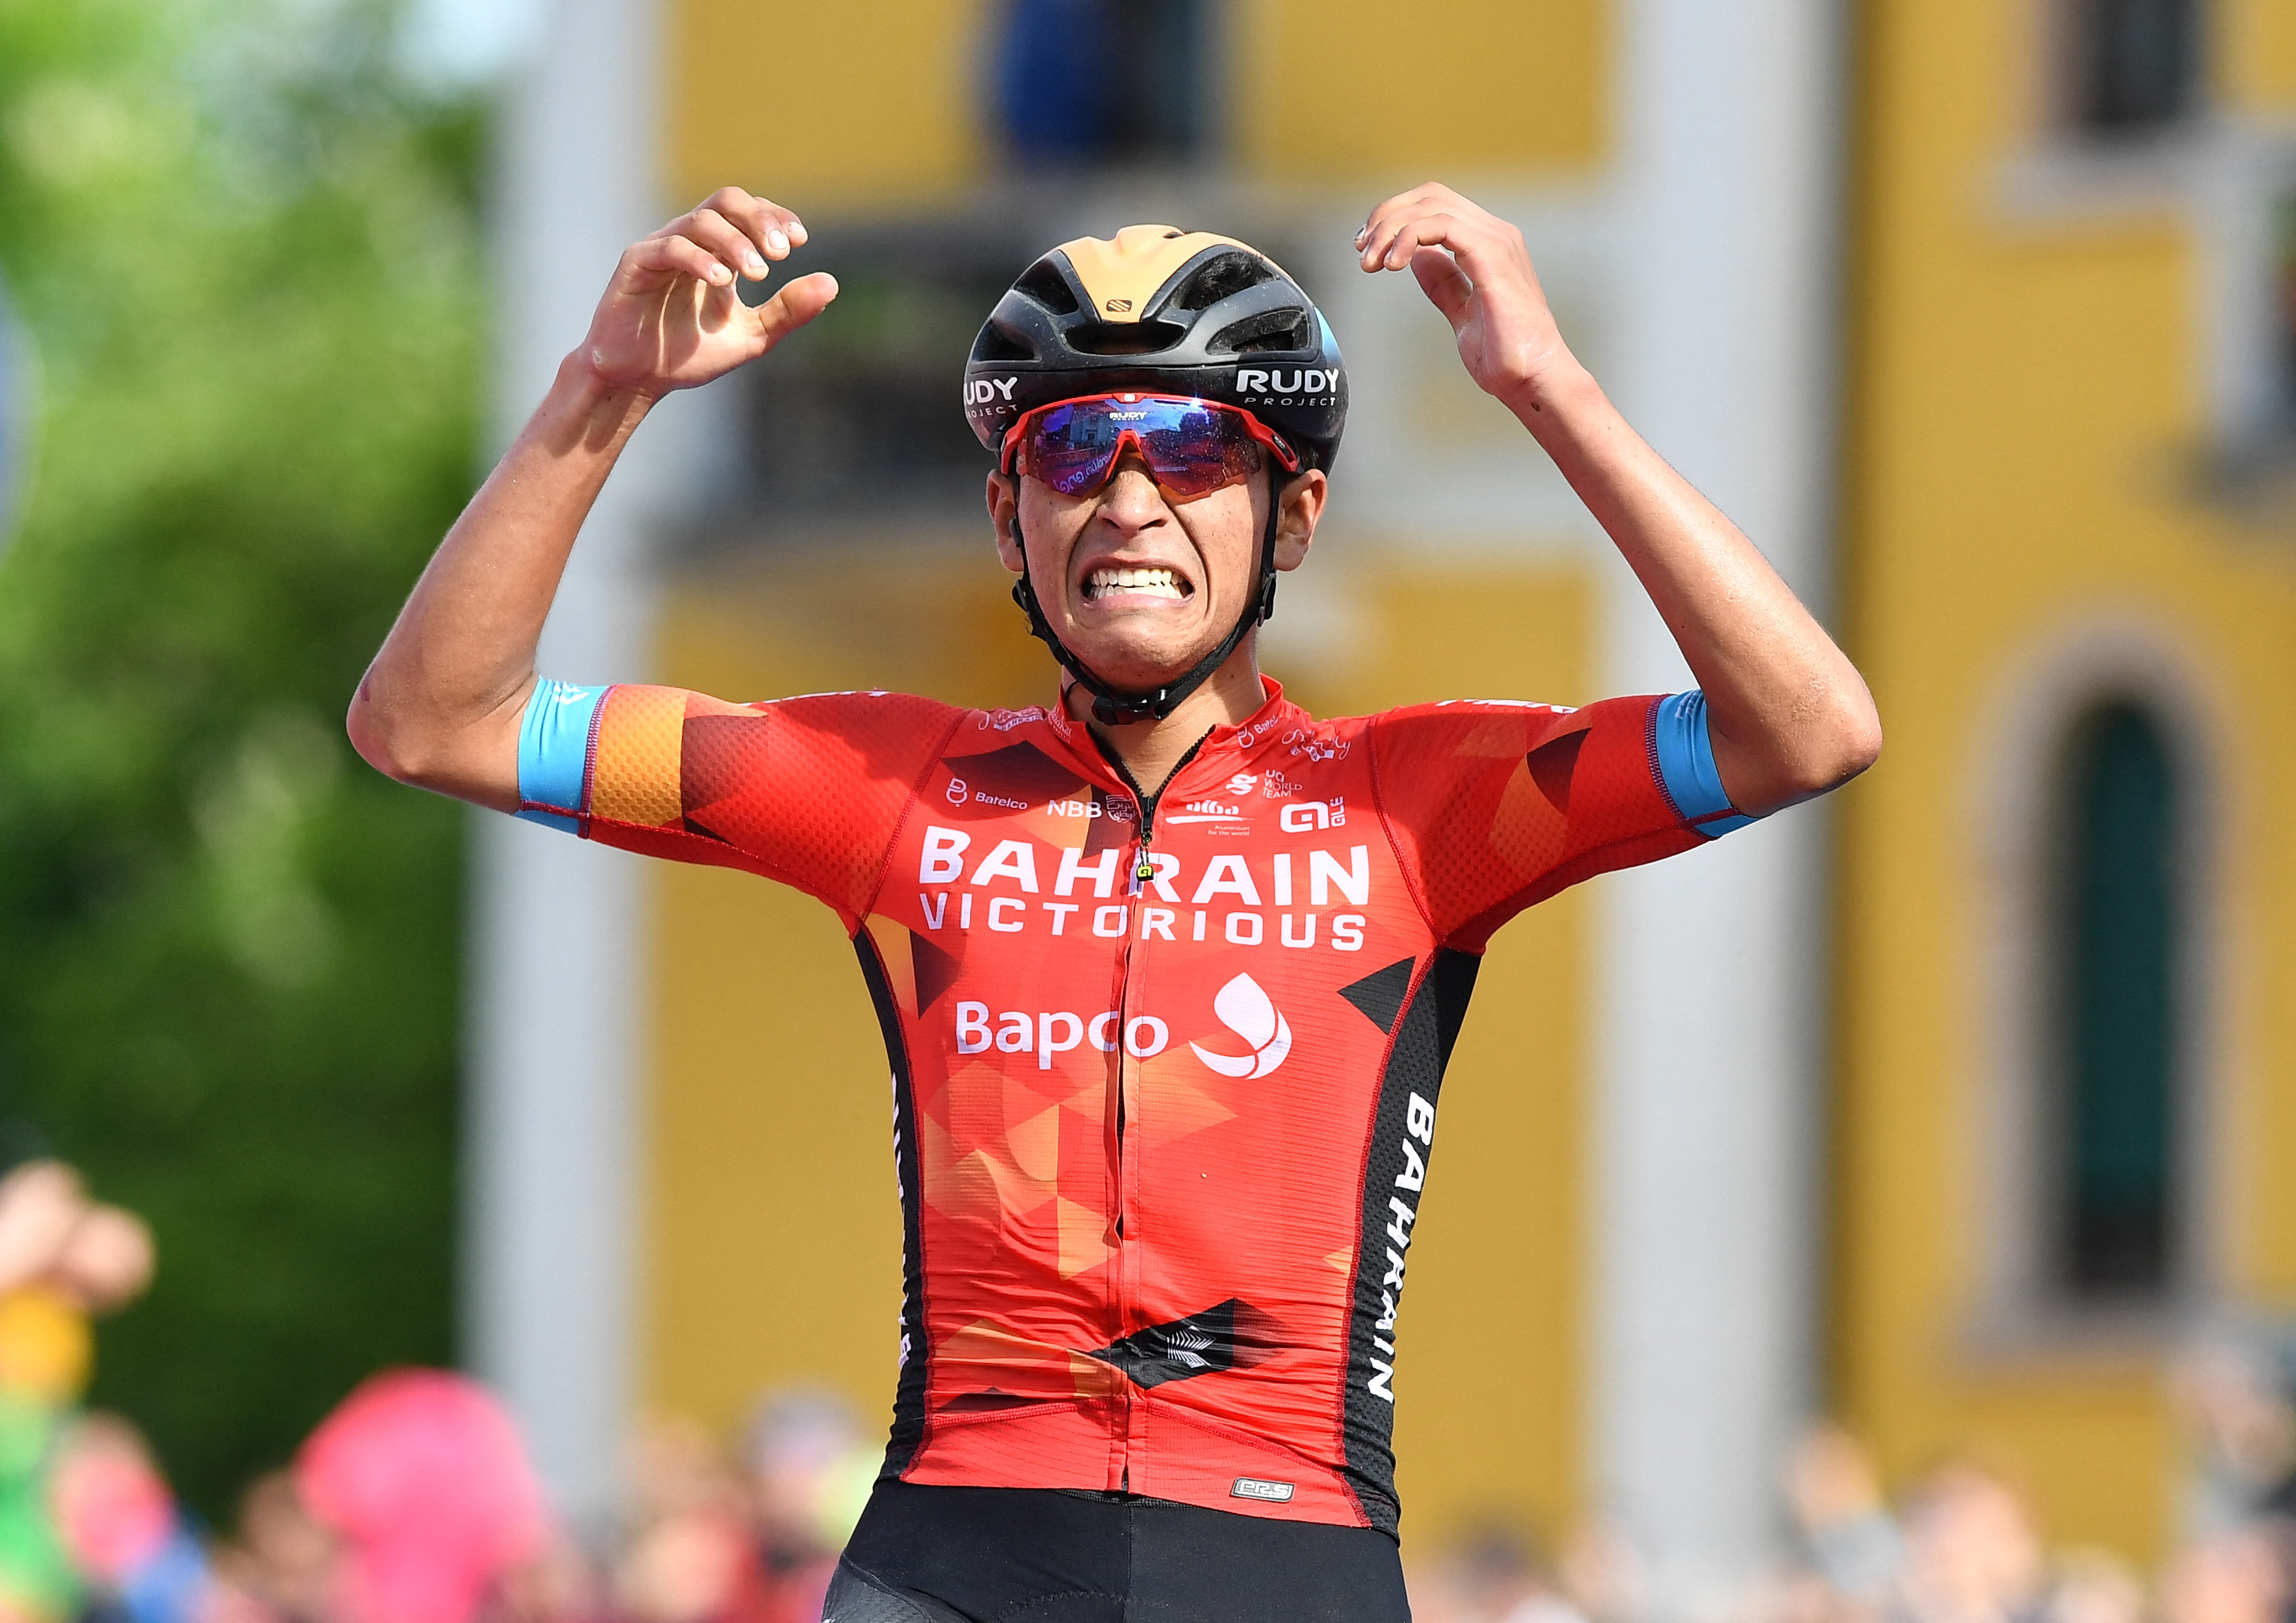 Cycling - Giro d'Italia - Stage 17 - Ponte di Legno to Lavarone, Italy - May 25, 2022 Bahrain - Victorious' Santiago Buitrago celebrates after crossing the line to win stage 17 REUTERS/Jennifer Lorenzini